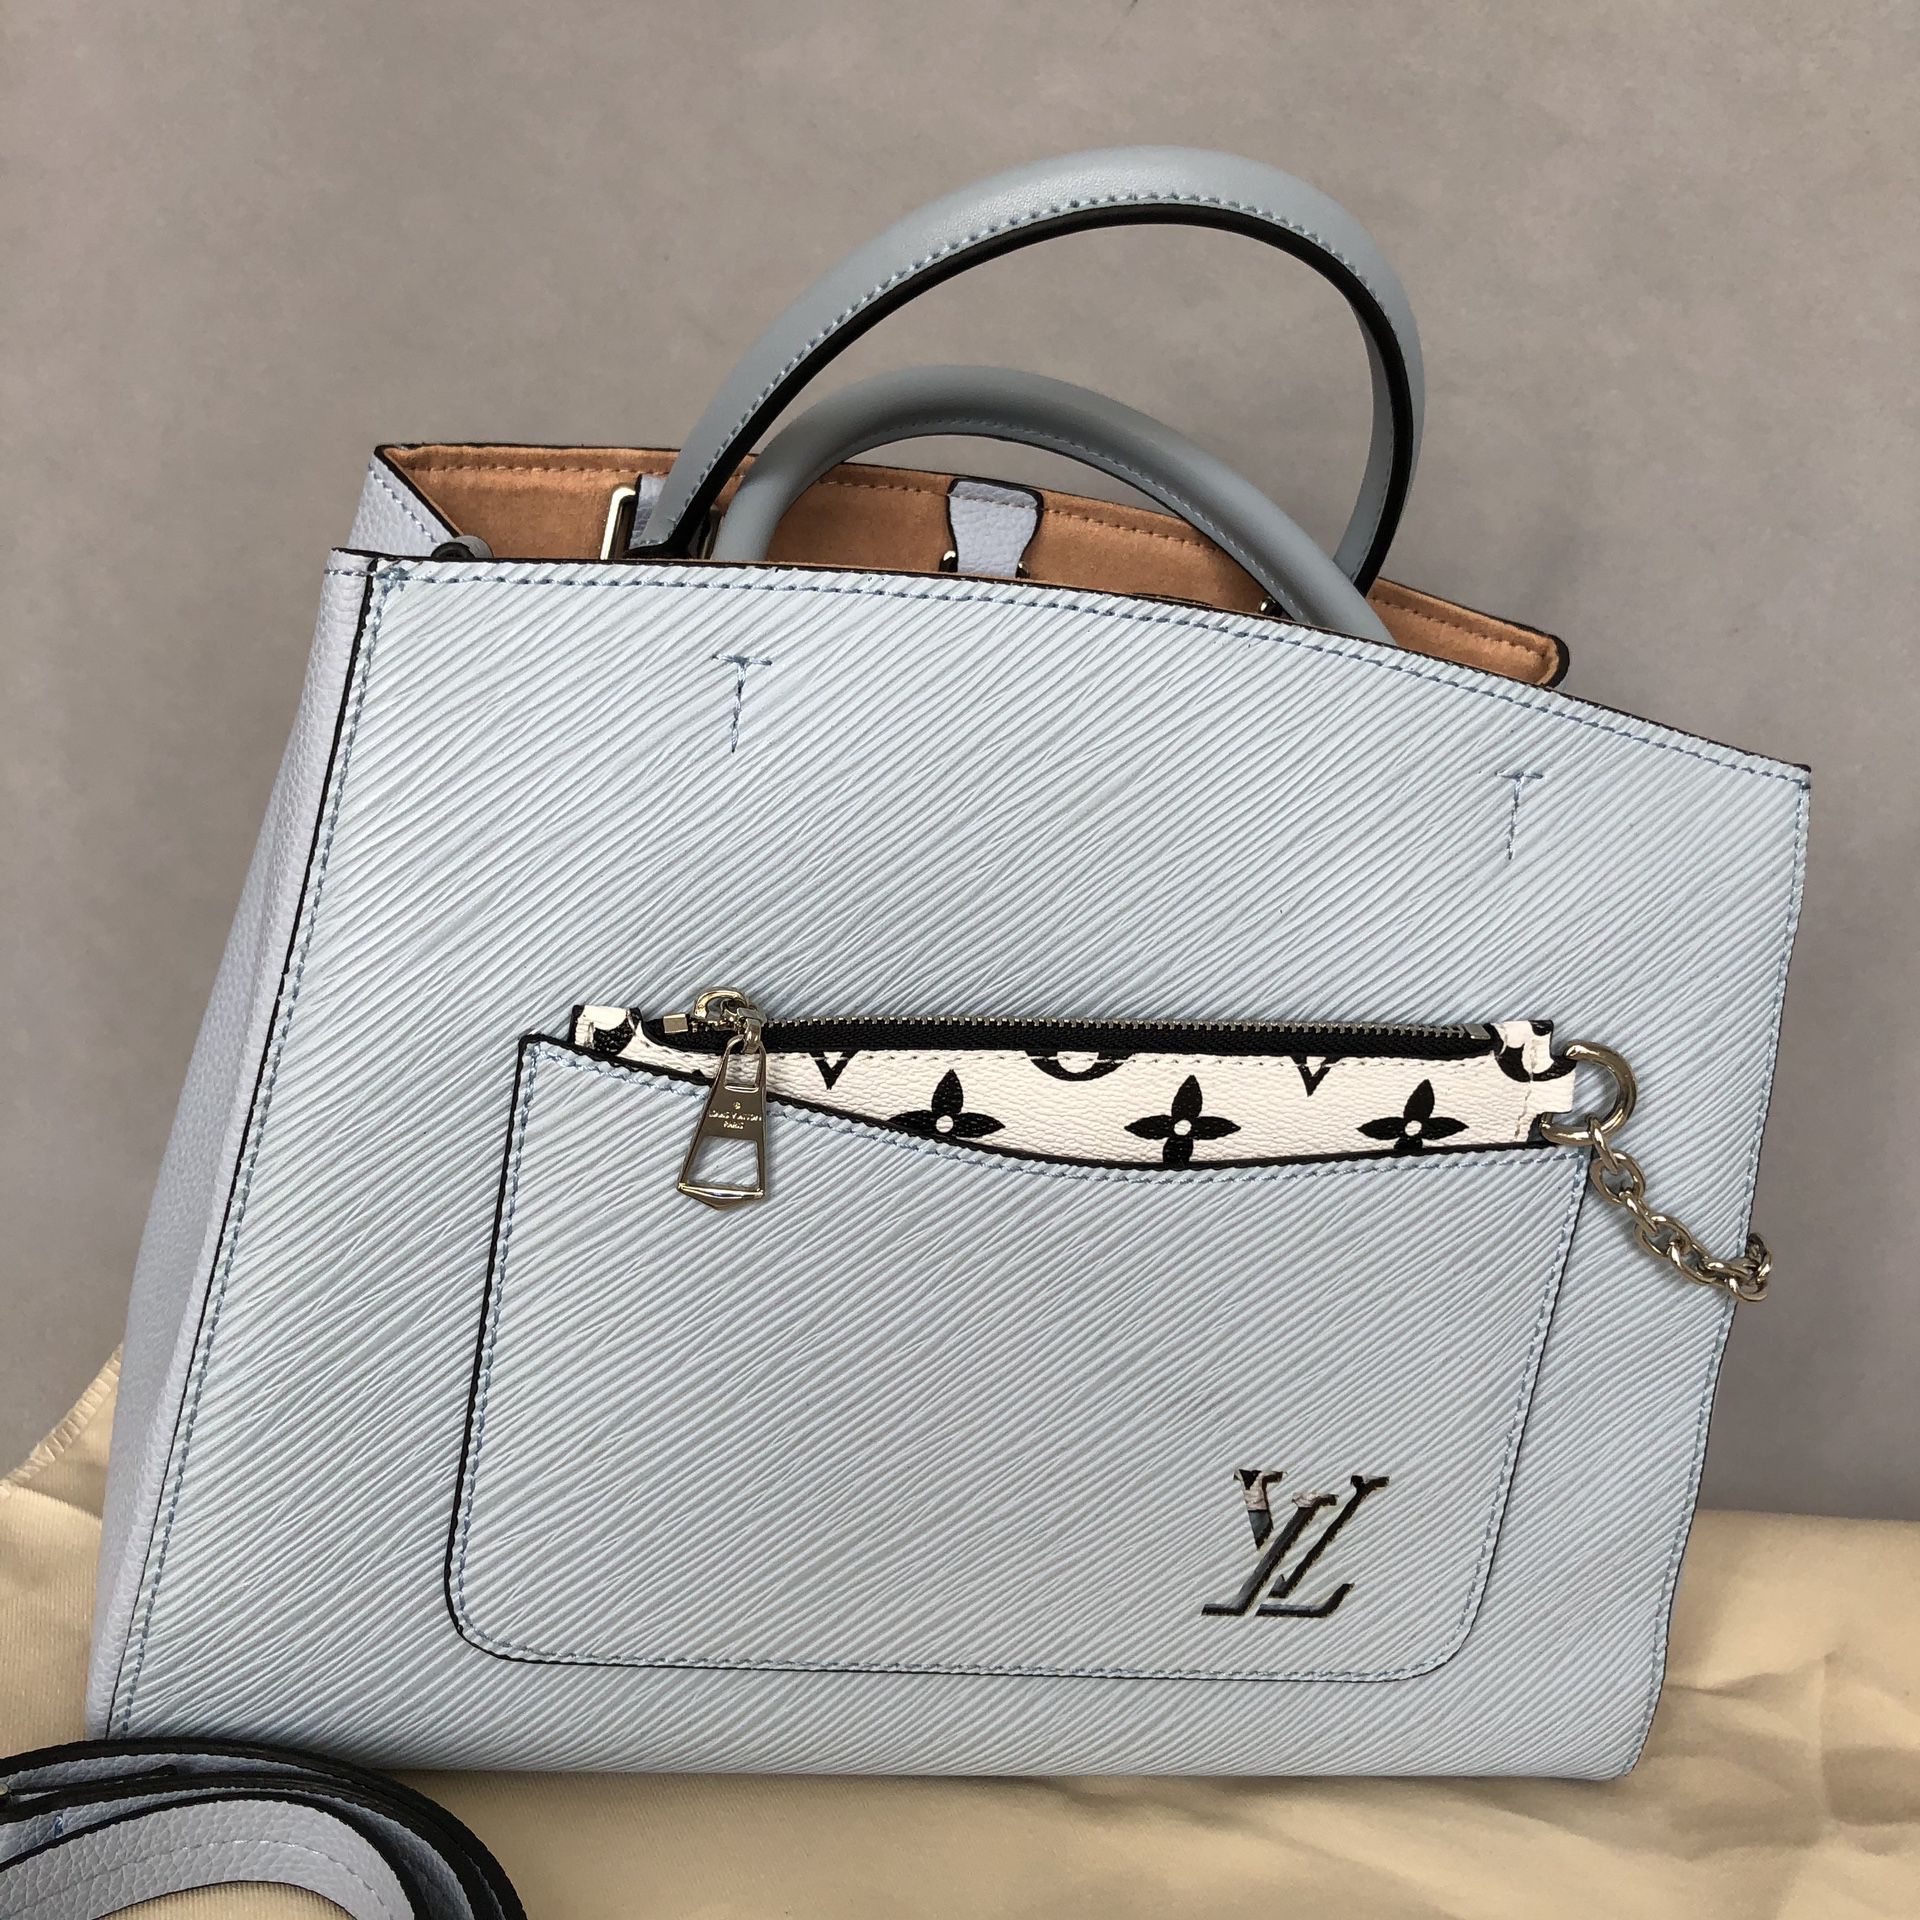 Louis Vuitton Marelle Tote BB Bag in Epi Leather M59950 Blue 2022